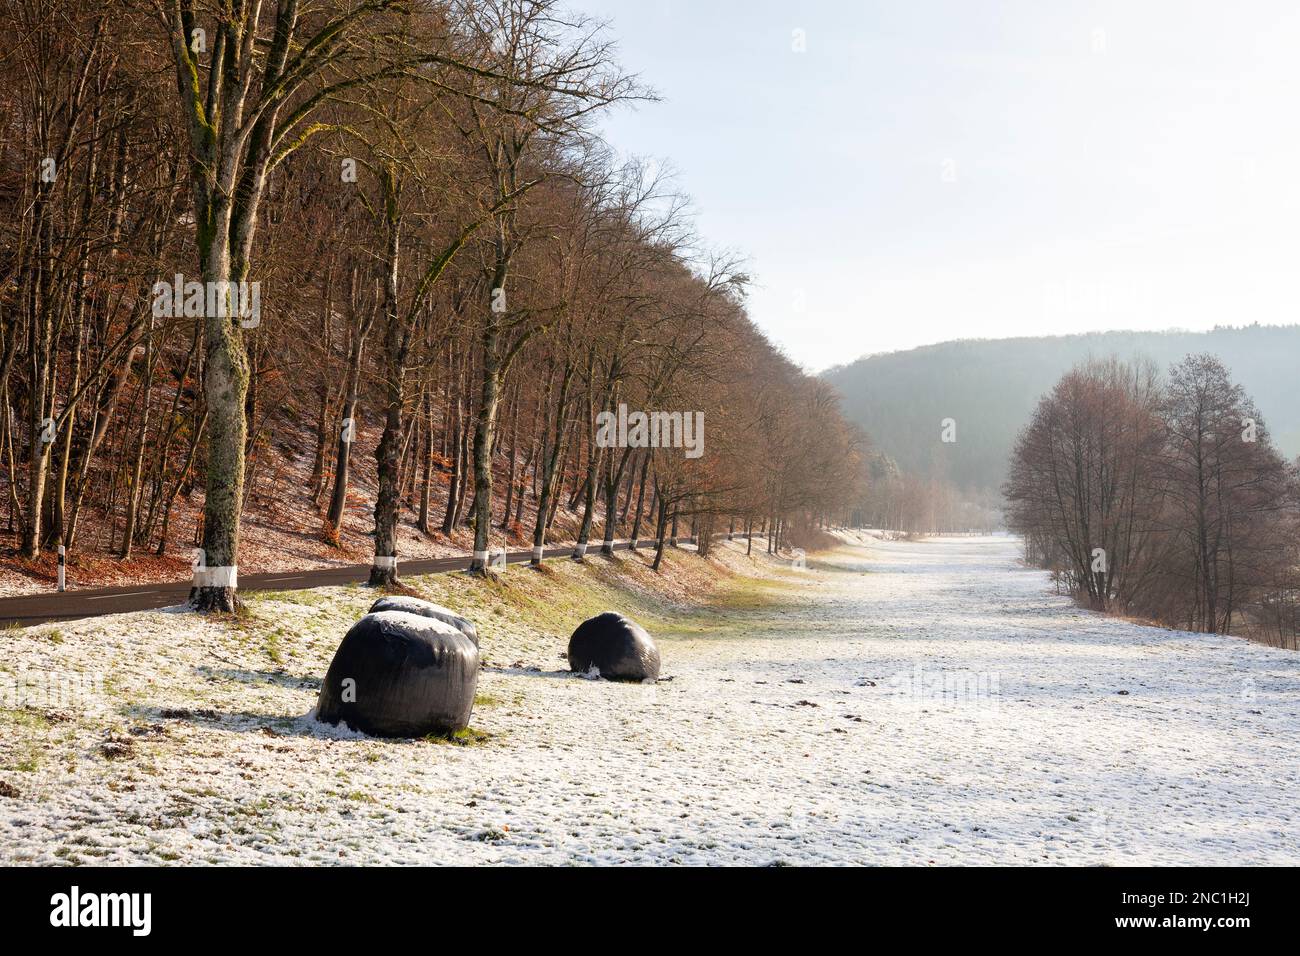 Europe, Luxembourg, Septfontaines, Views along the Eisch Valley in Wintertime beside the CR105 Highway Stock Photo